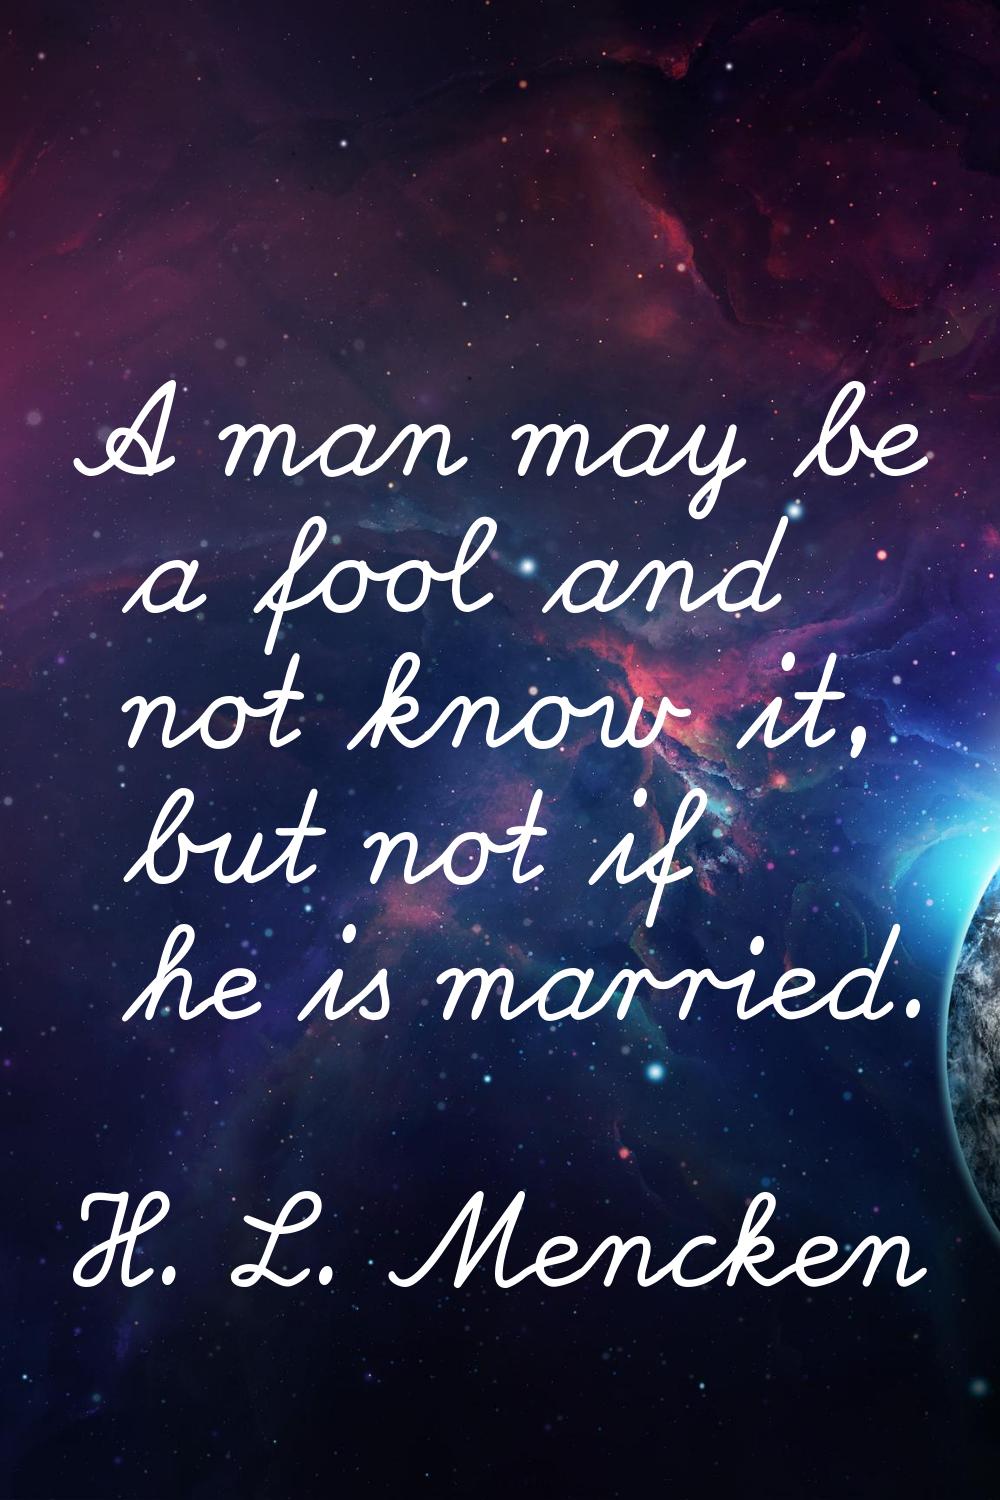 A man may be a fool and not know it, but not if he is married.